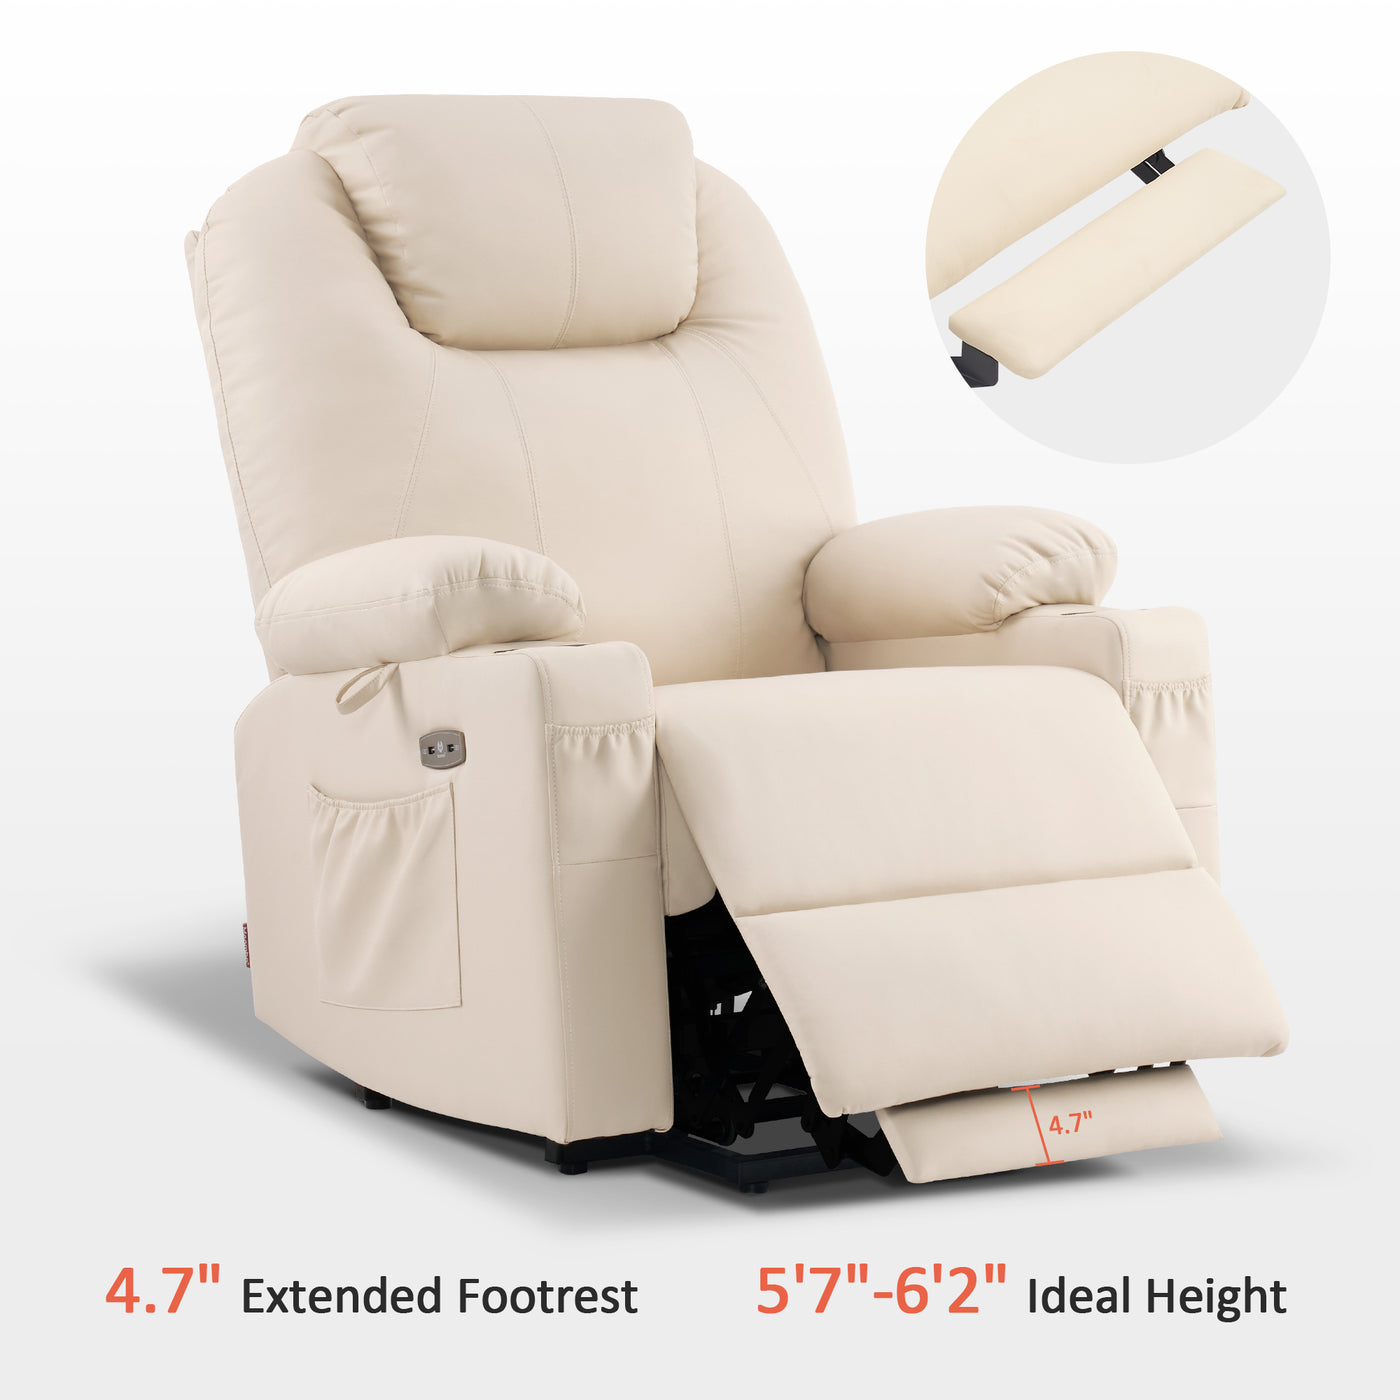 MCombo Large Dual Motor Power Lift Recliner Chair with Massage and Hea